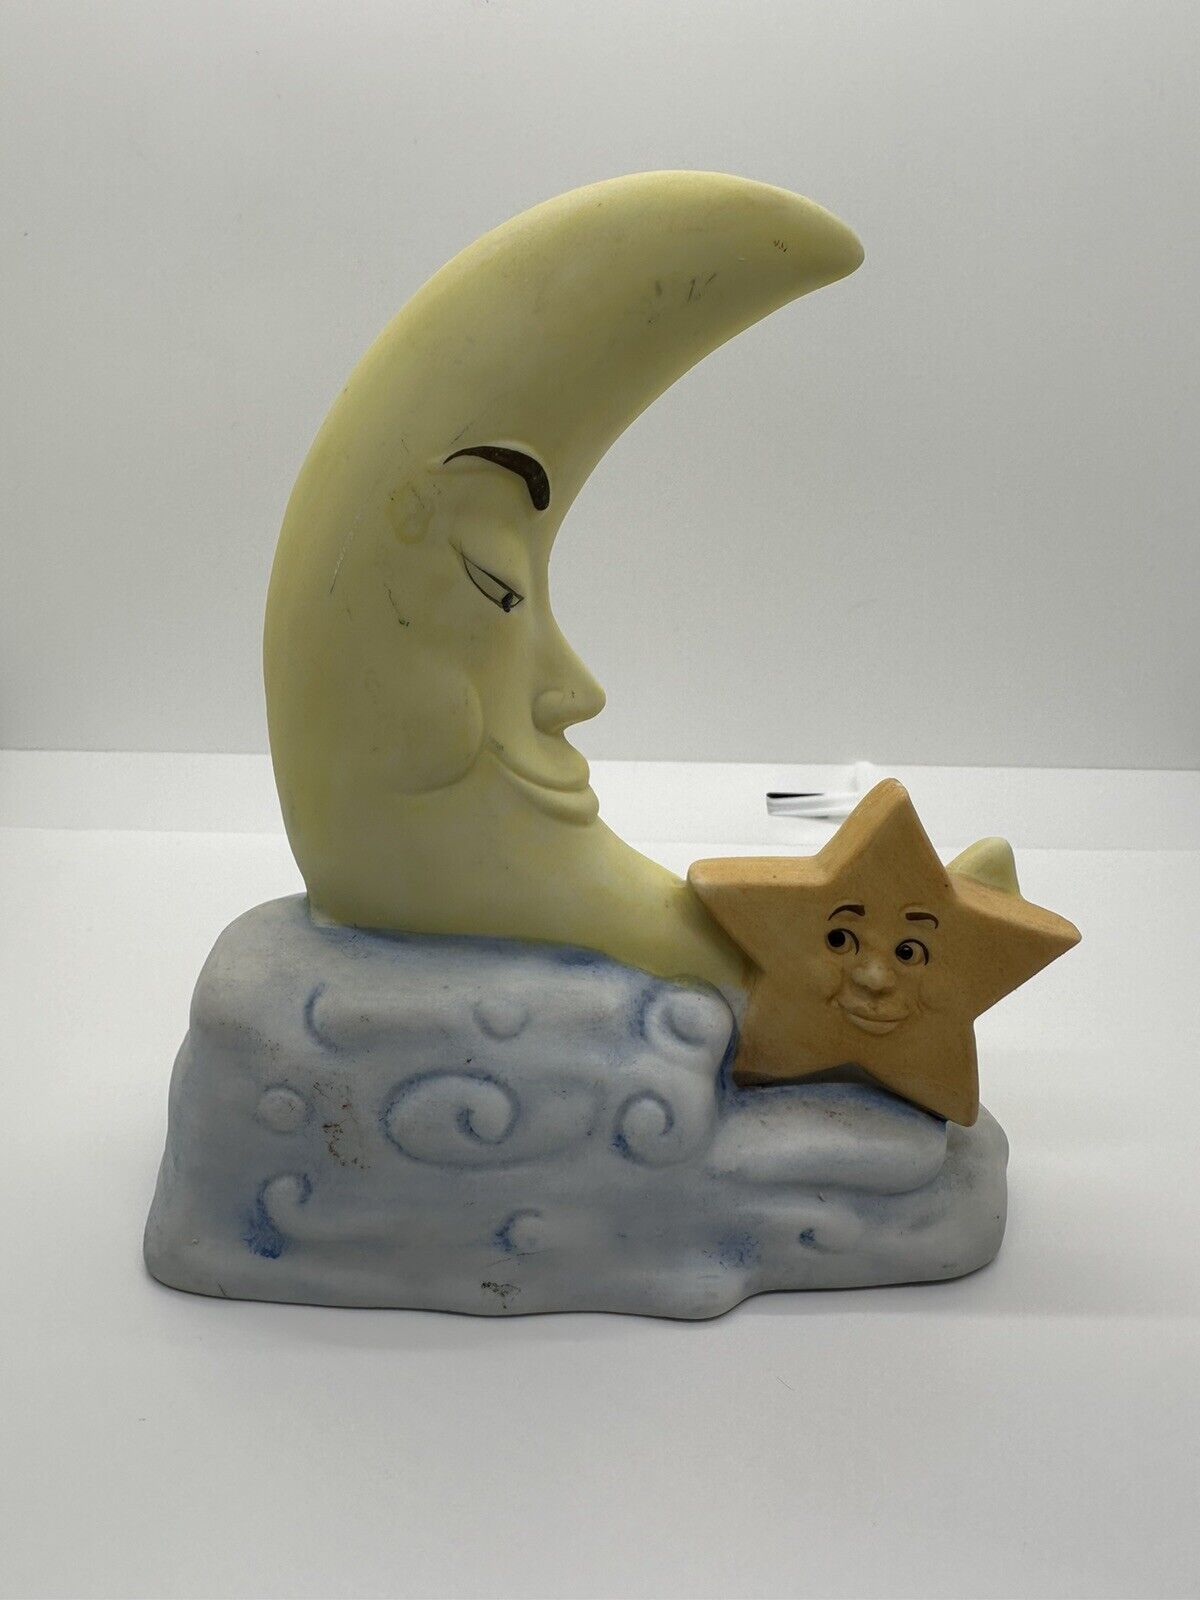 Moon & Star Musical Ceramic Collectible Mann 1980 Plays “Wish Upon A Star”